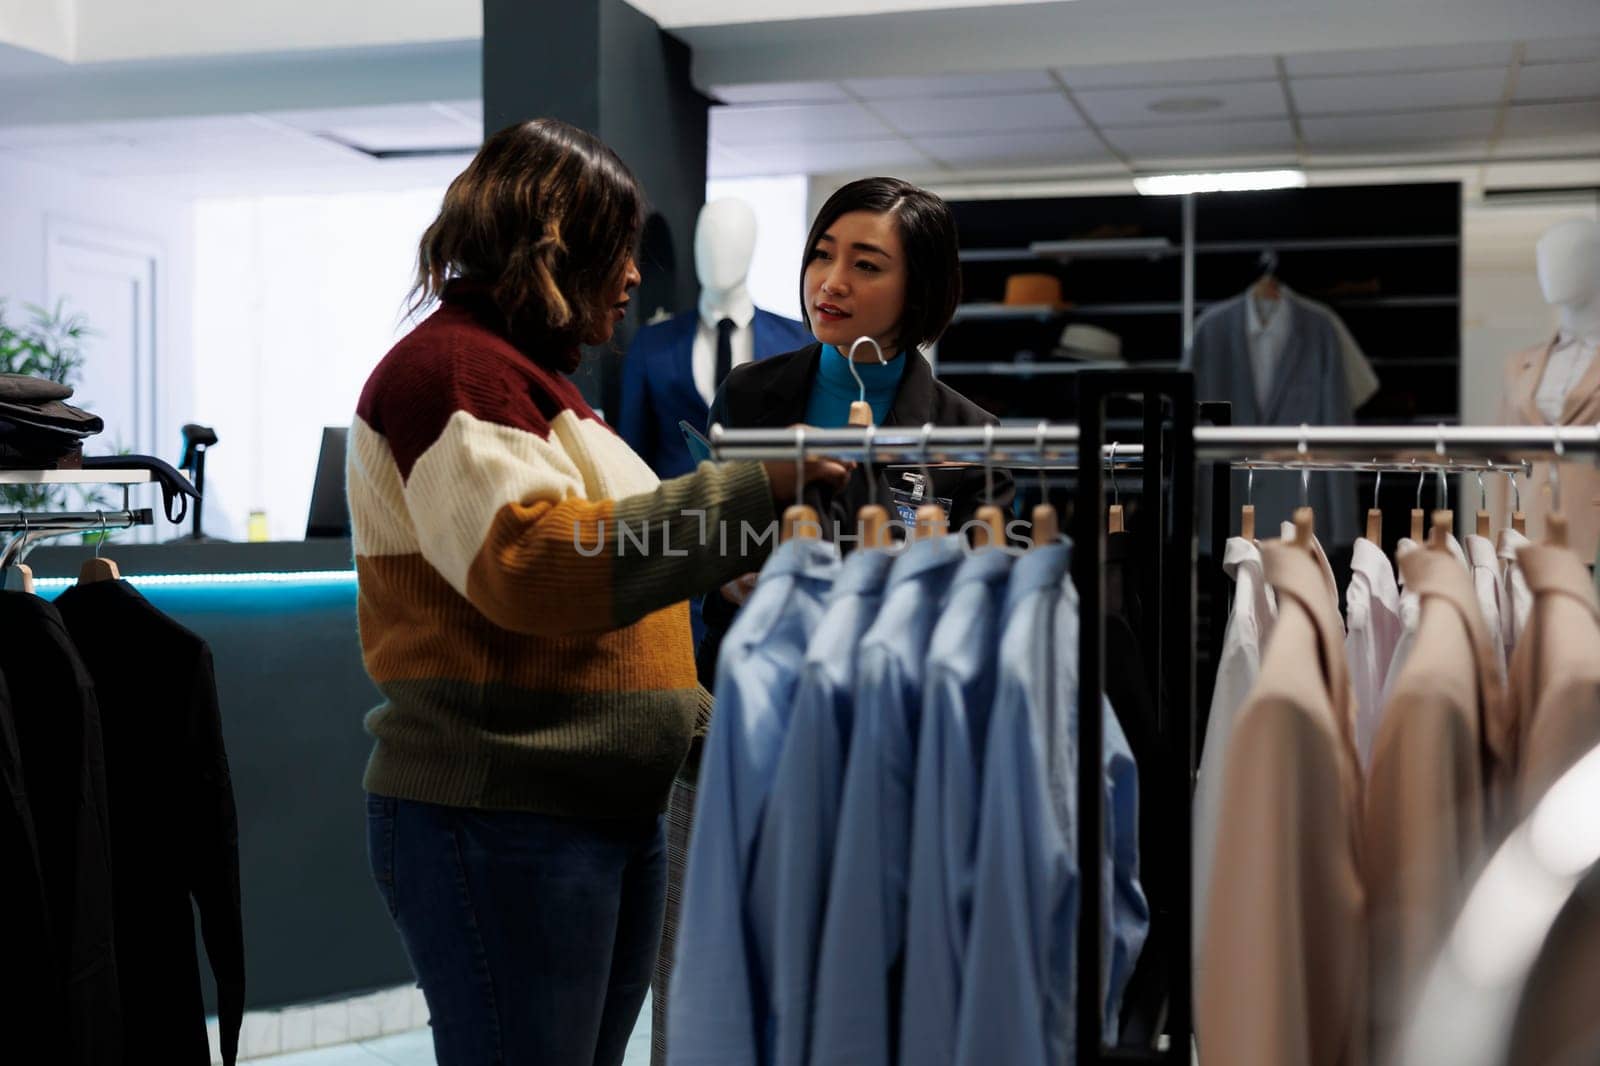 Store assistant talking with customer by DCStudio